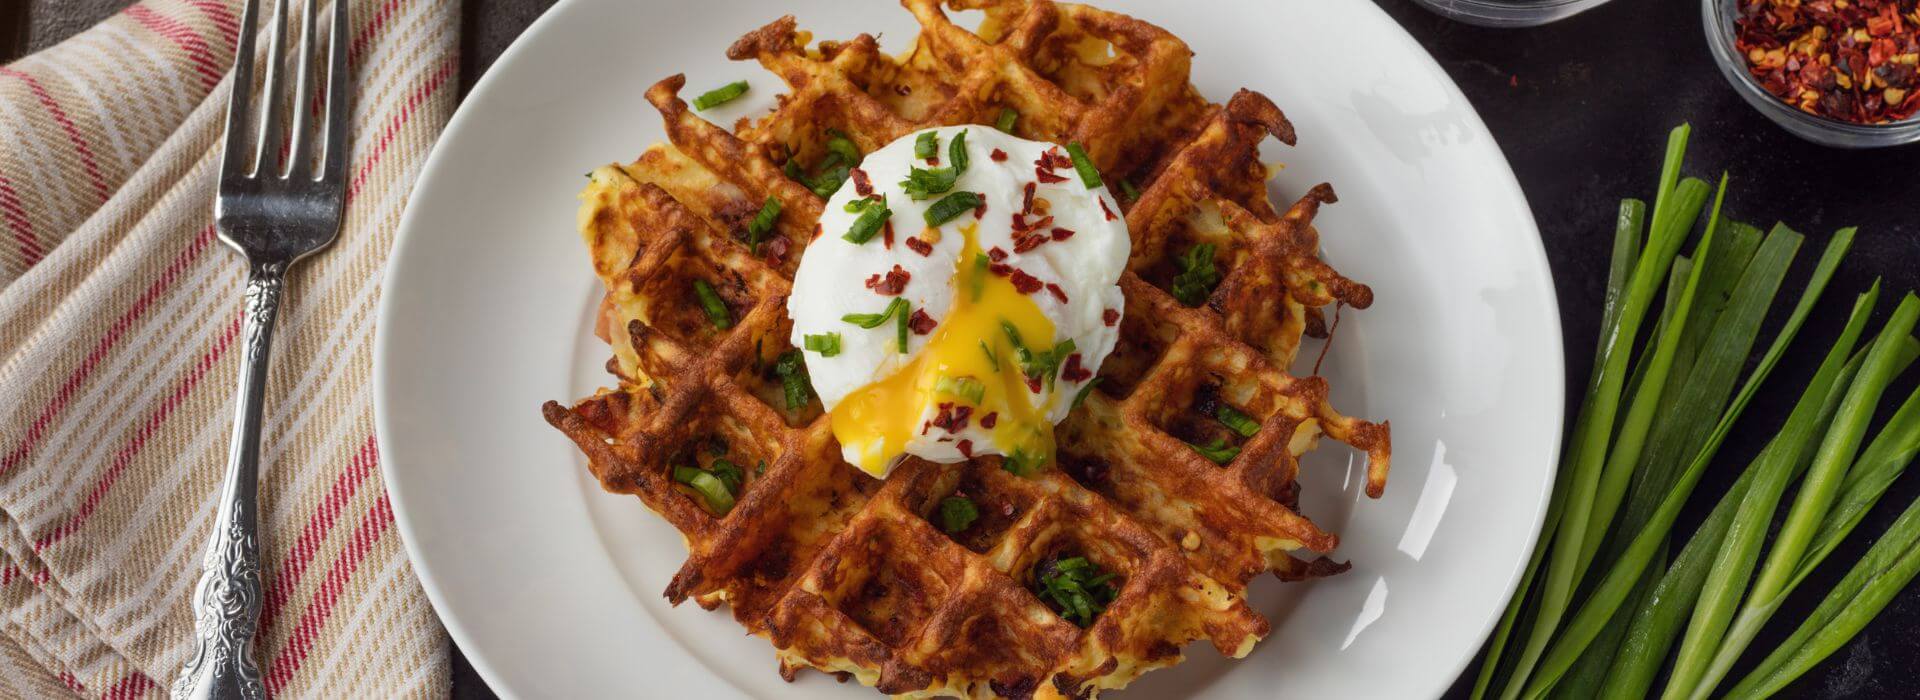 Galena Restaurants: A Foodie's Guide to the Best Breakfast, Lunch